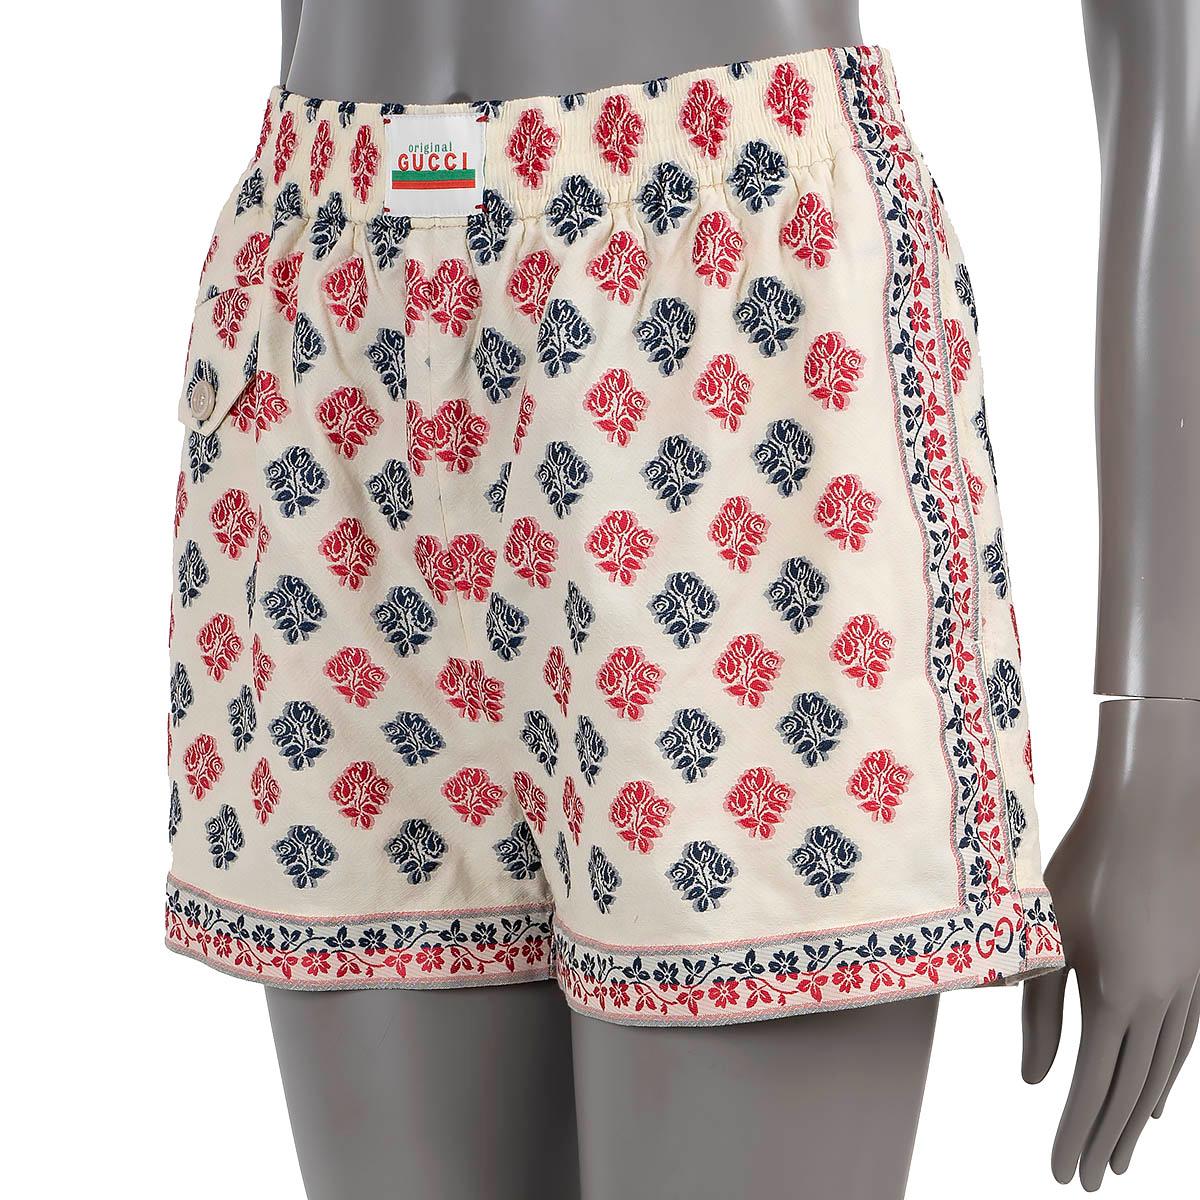 100% authentic Gucci floral jacquard shorts in ivory, pink and navy blue cotton (67%) and polyester (33%).  Features buttons flap pocket on the front and to slit pockets at the hips. Elastic waist ban with logo patch. Unlined. Have been worn and are